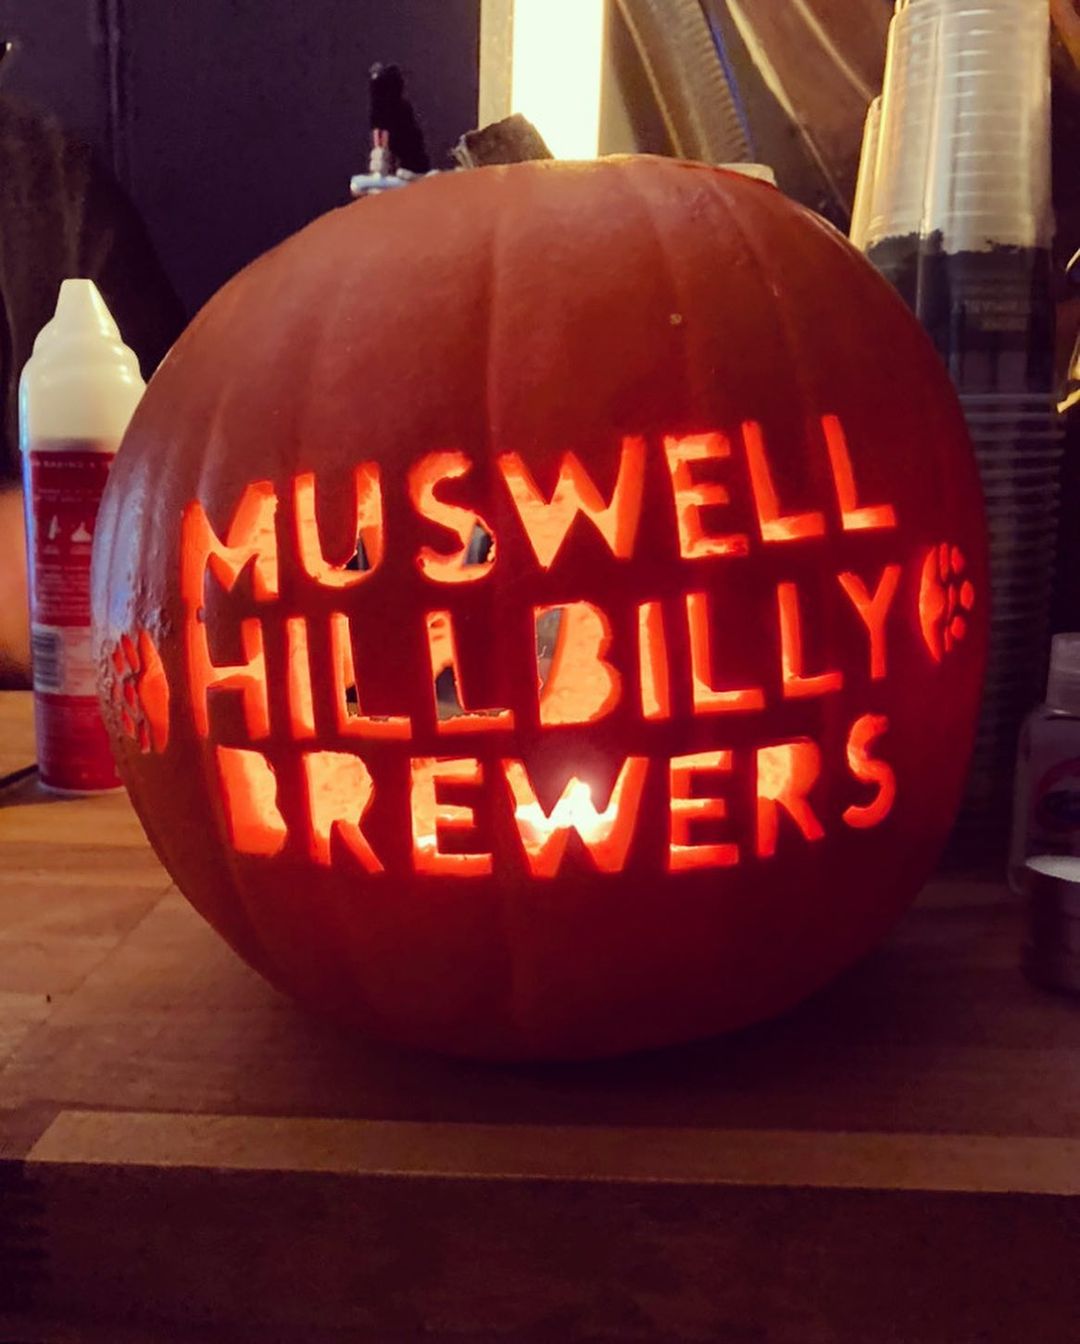 Welcome Muswell Hillbilly Brewers as Full Brewing Members